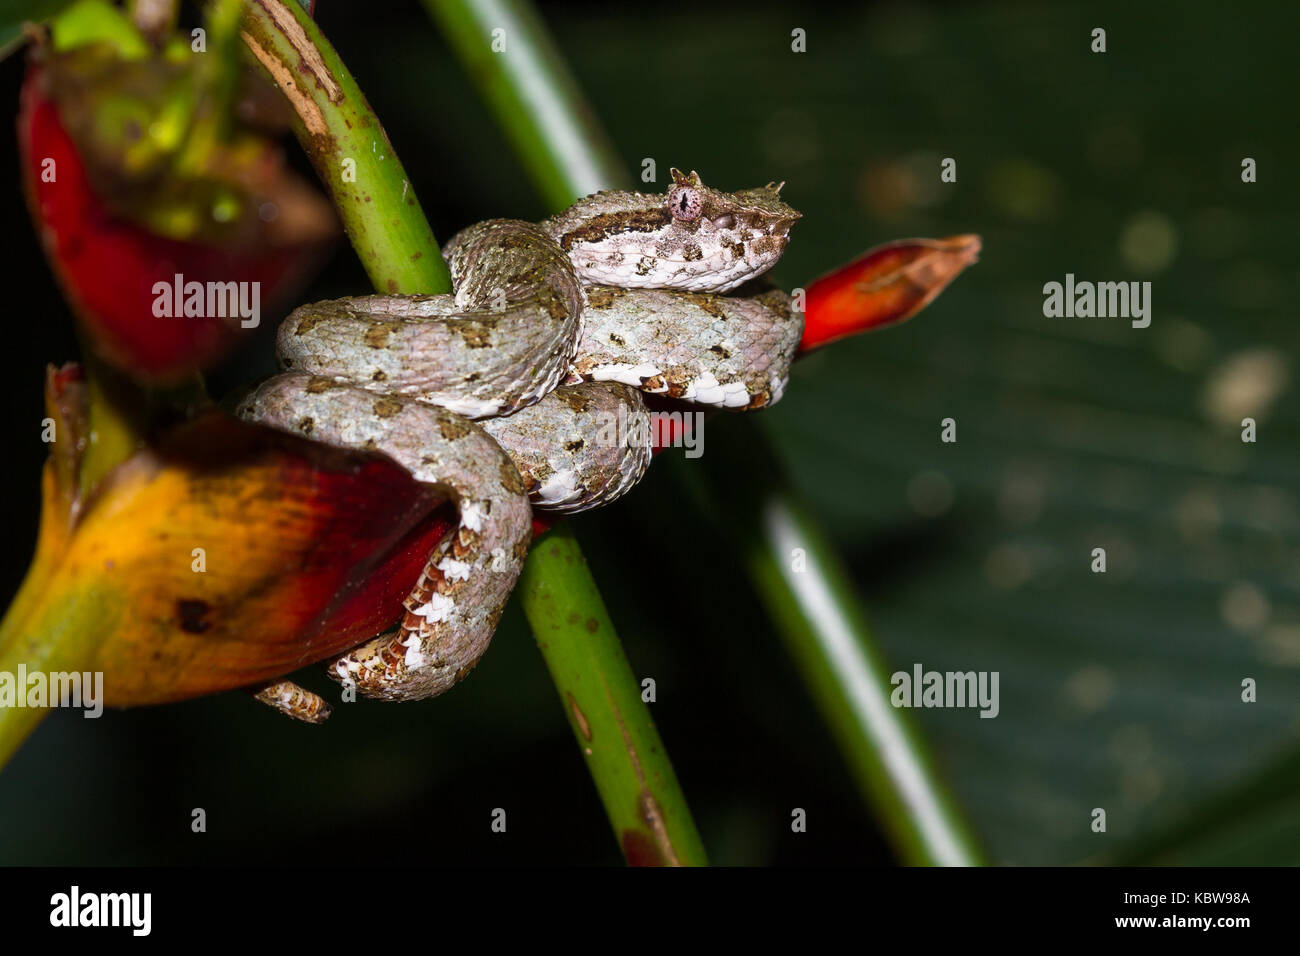 Close up of a eyelash viper wrapped around a tropical flower in Costa Rica Stock Photo